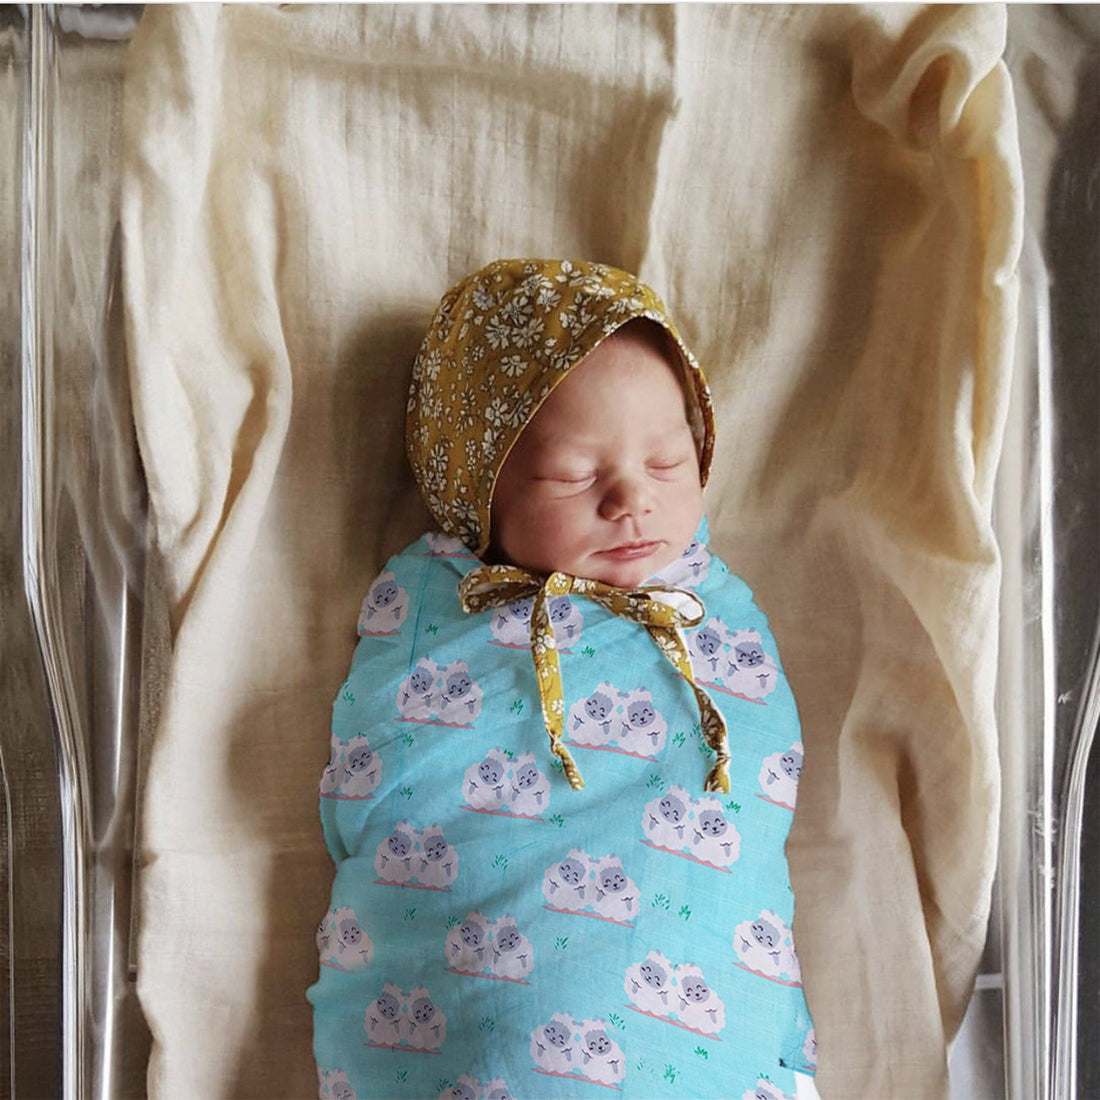 How to Swaddle a Newborn?